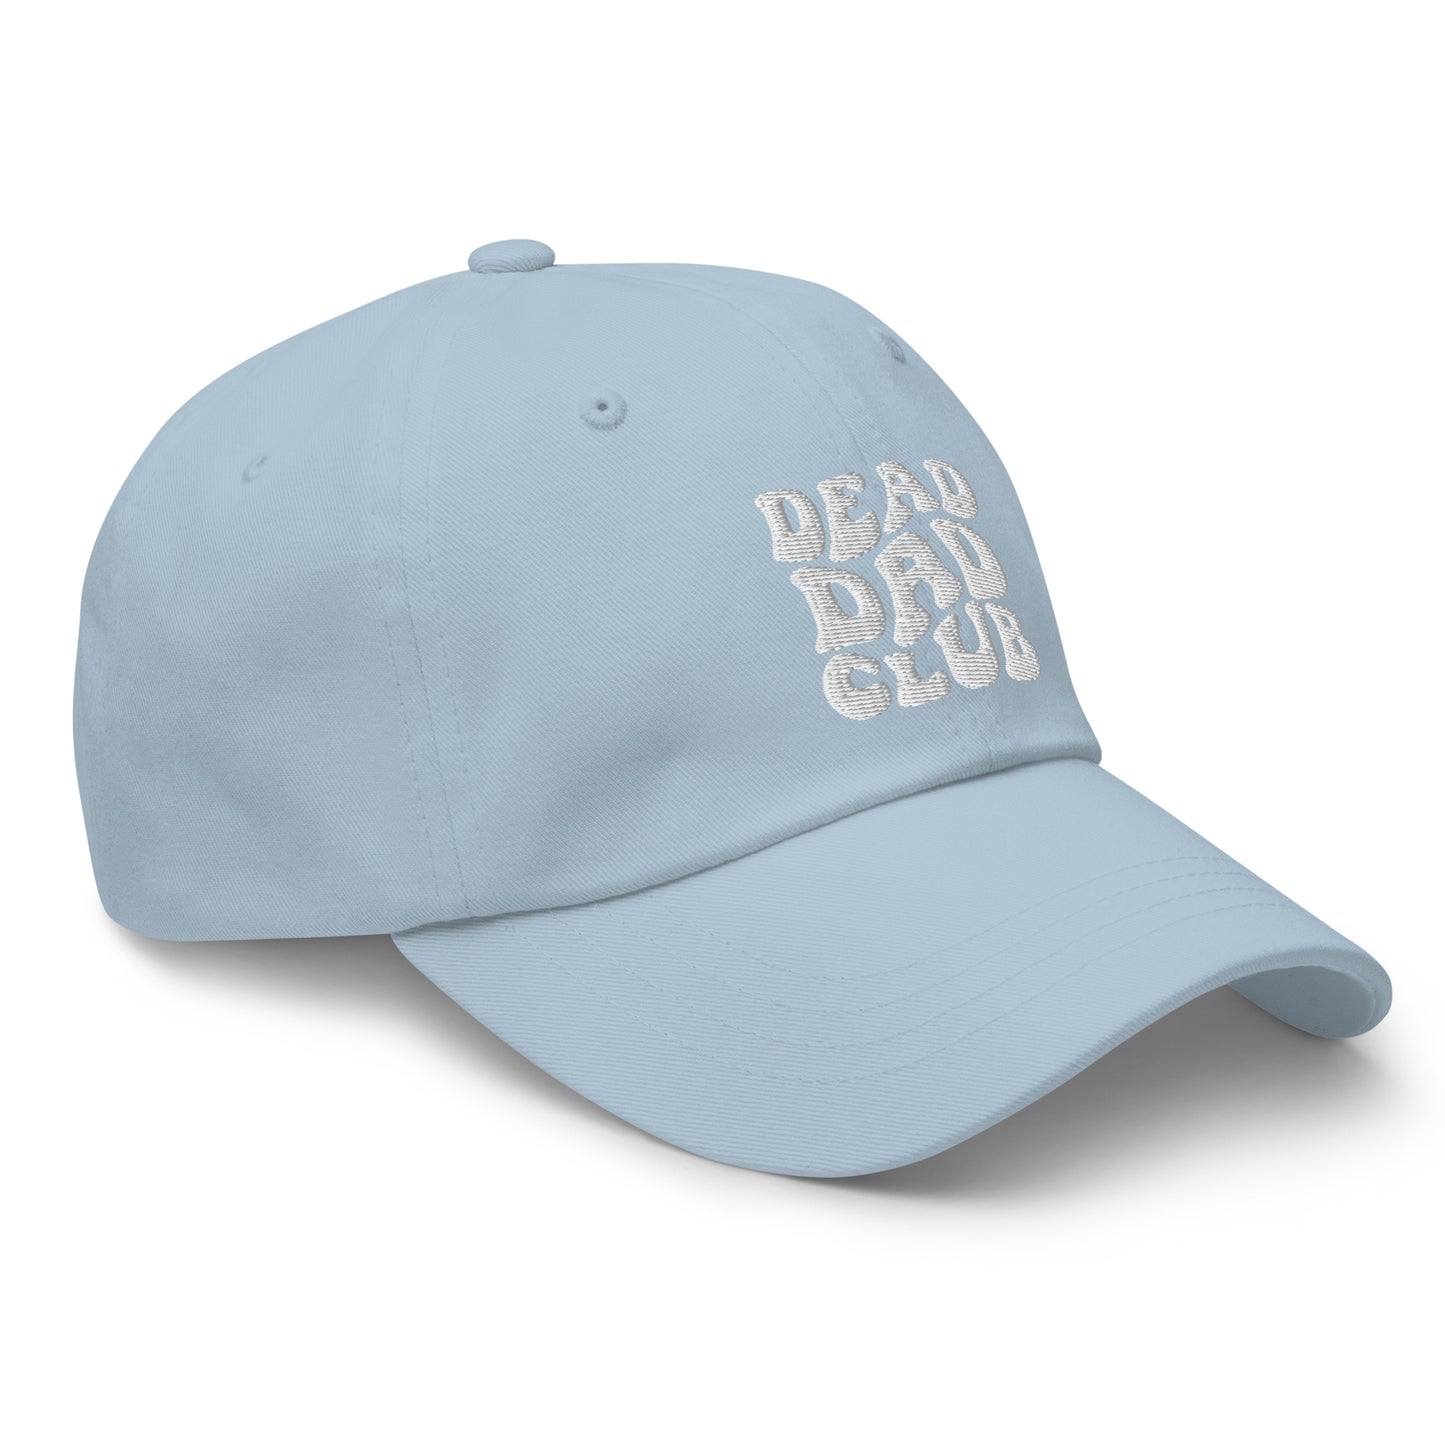 The (Dead) Dad Hat